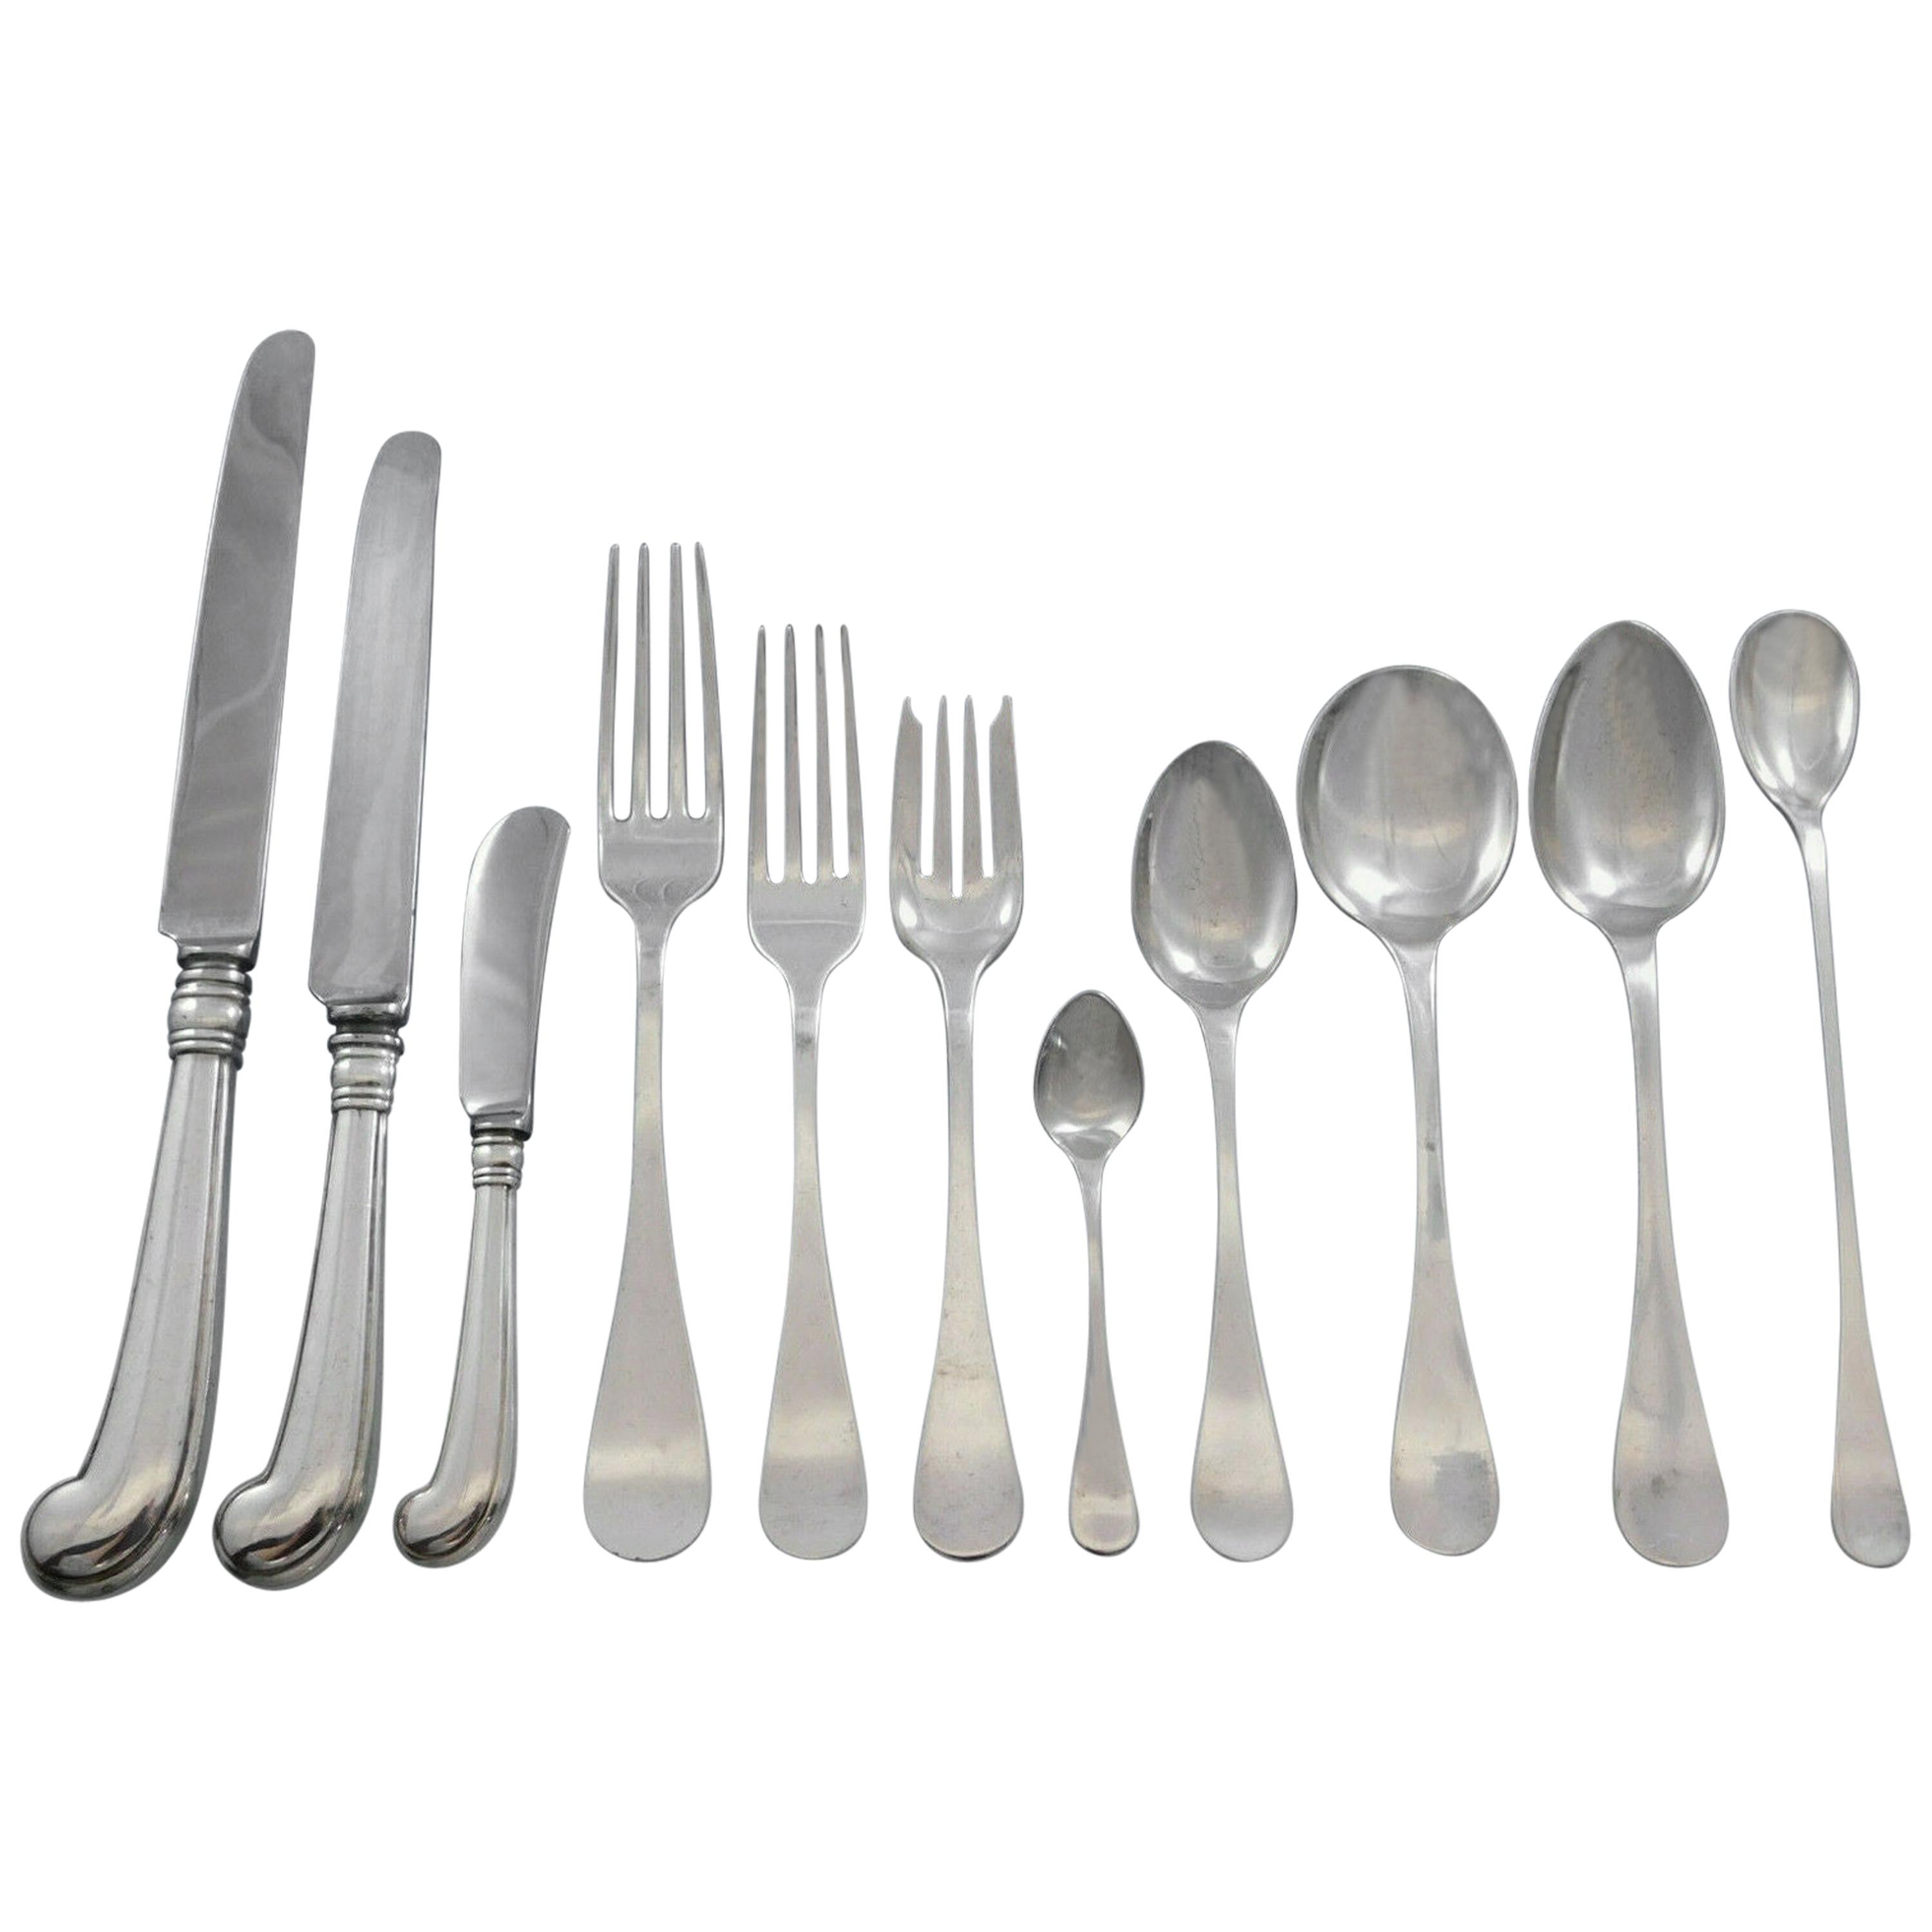 King William, Tiffany & Co. Sterling Silver Flatware Set for 8 Dinner 92 Pieces